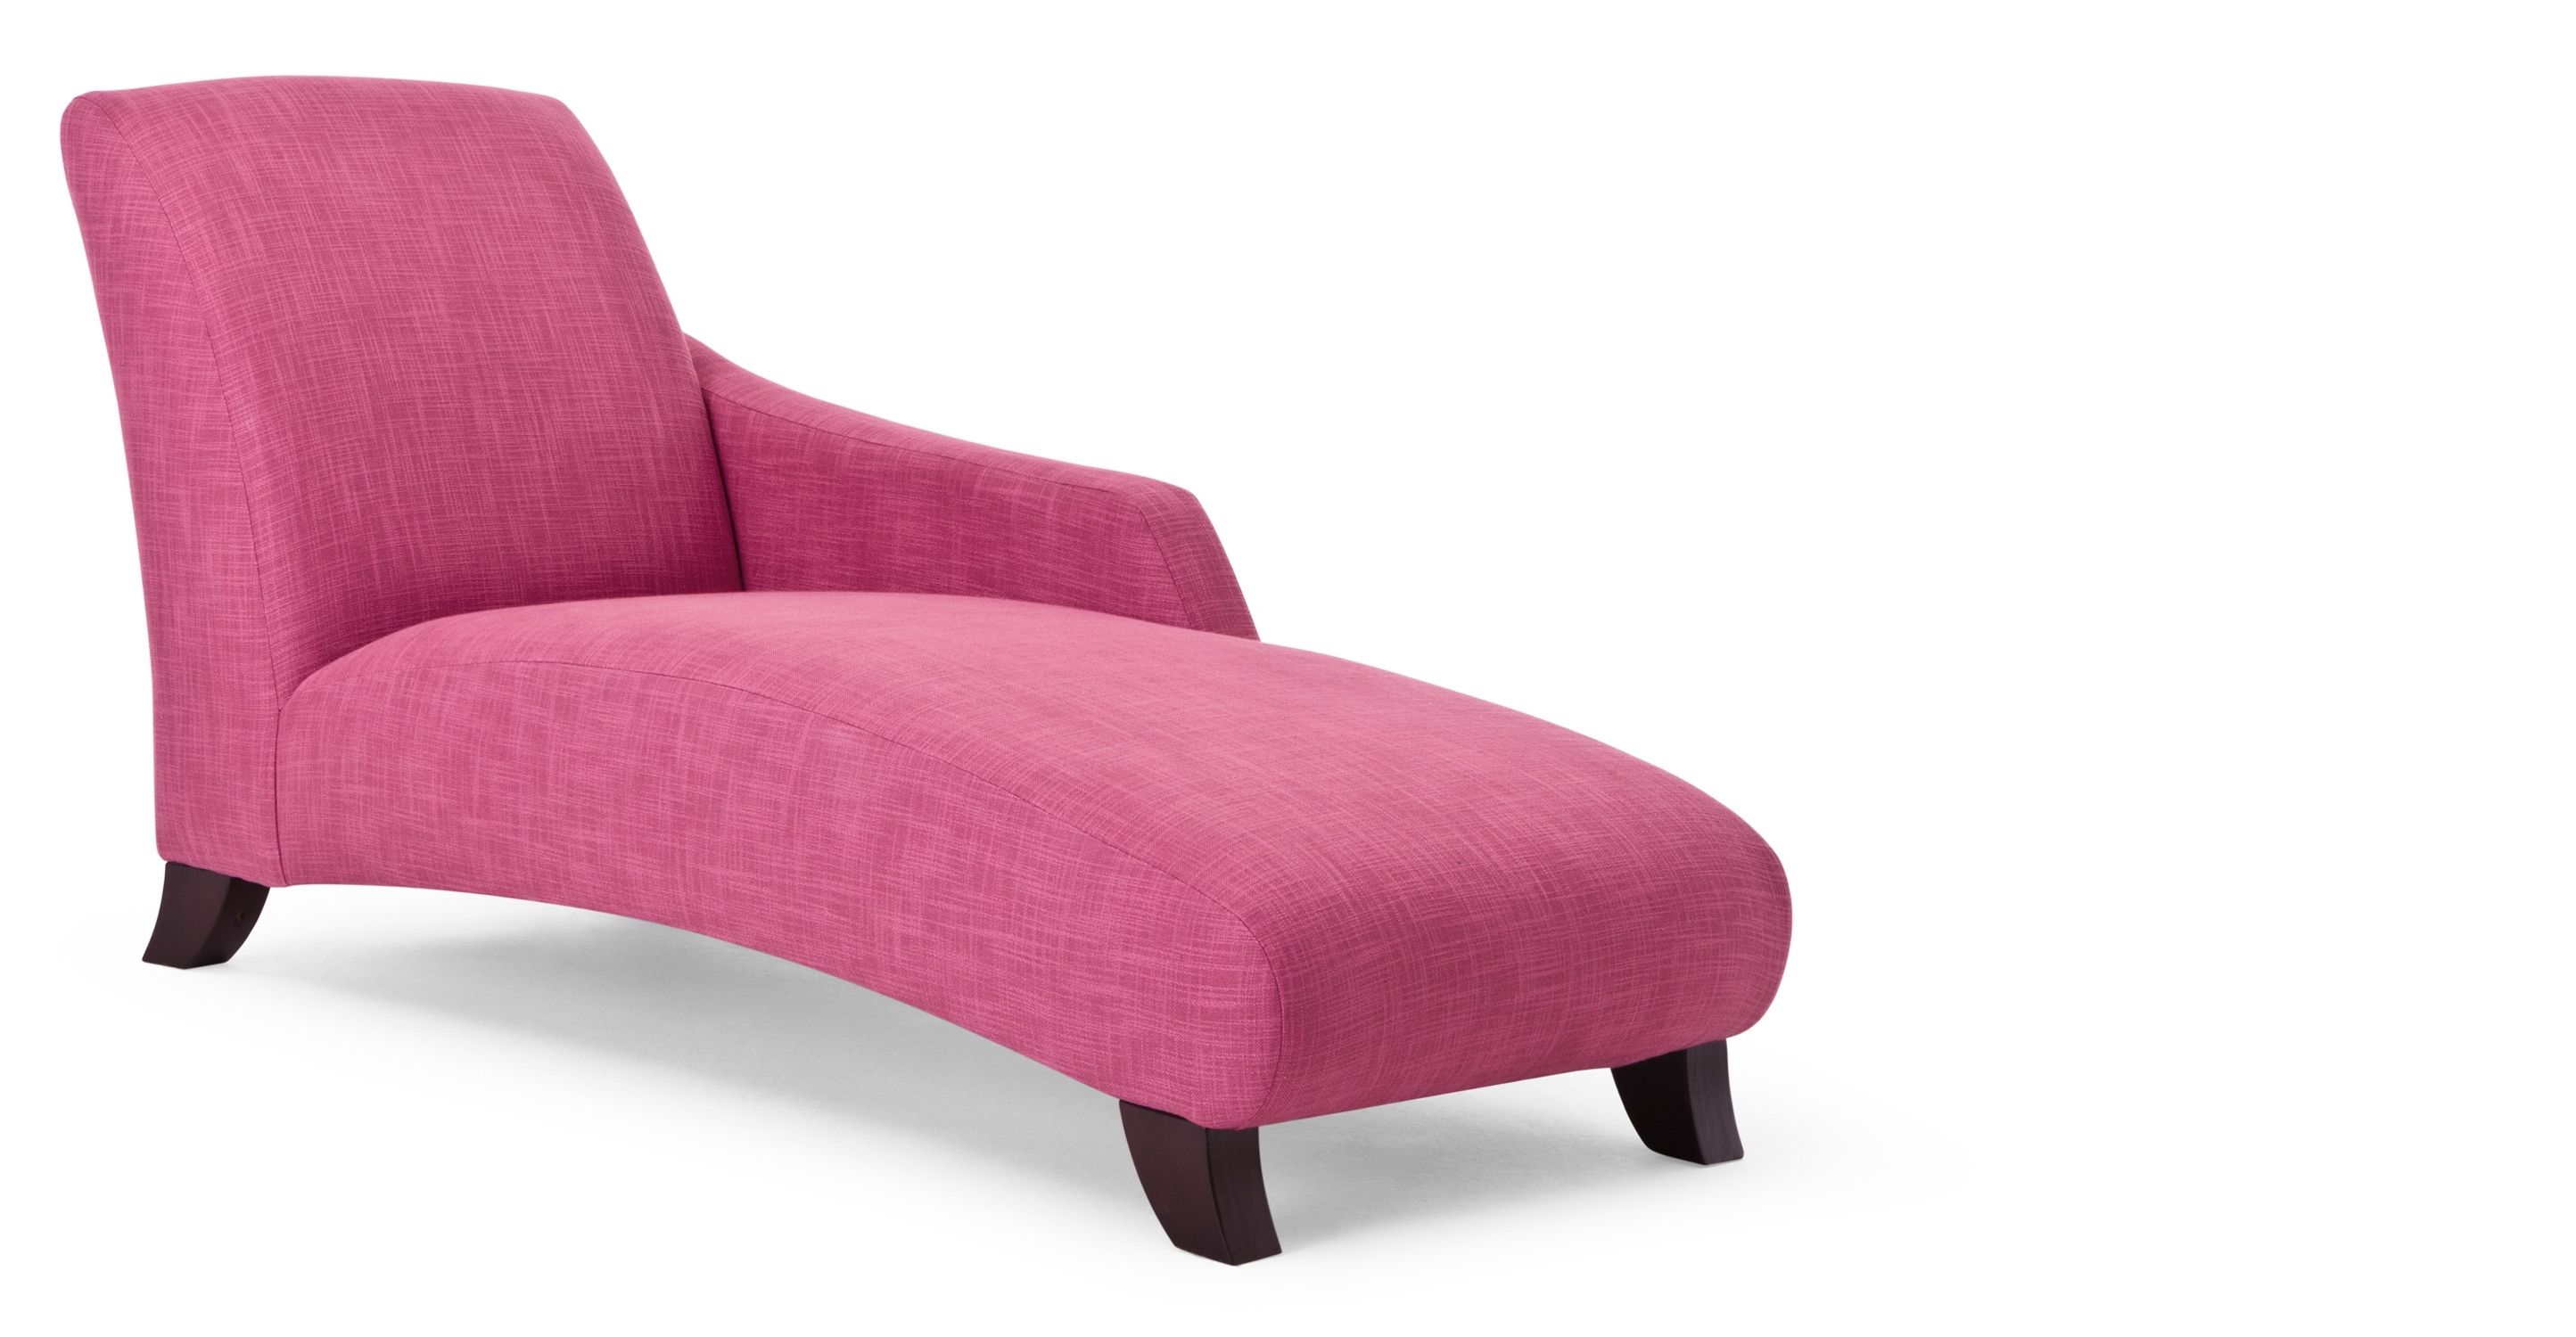 Preferred Pink Chaise Lounges With Regard To Bedroom: Chaise Lounge Chair For Bedroom In Pink Theme Made Of (Photo 9 of 15)